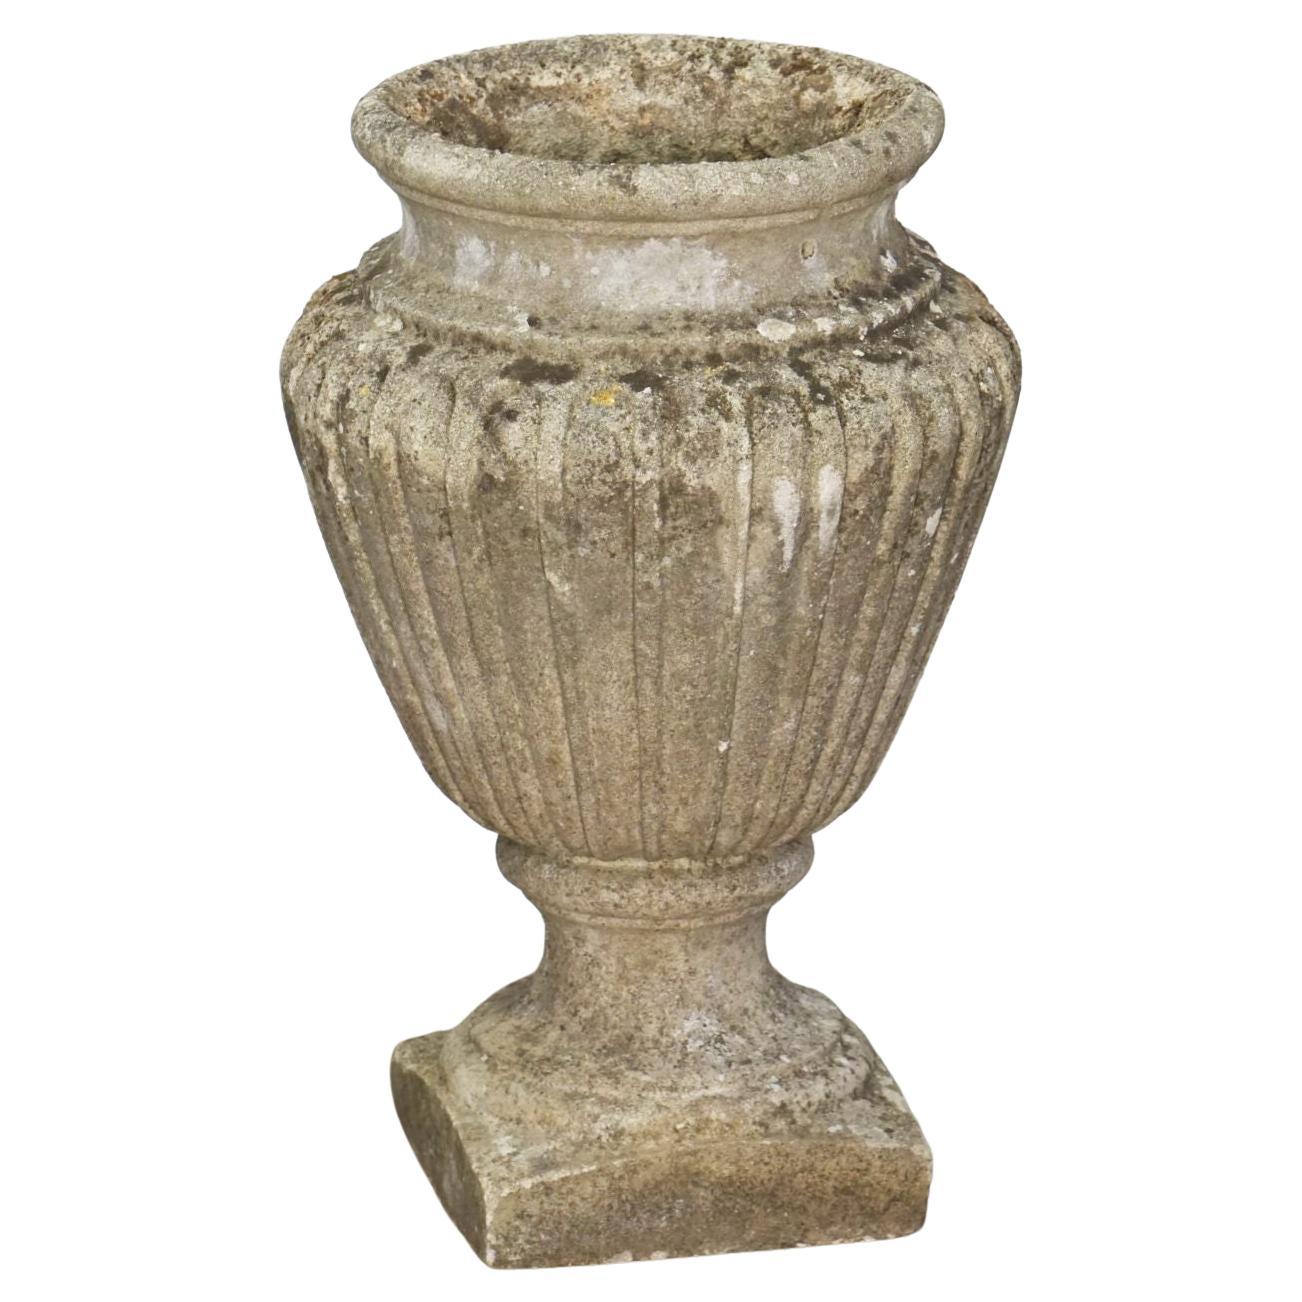 A pair of fine English garden urn vases or planter pots of composition stone from the early 20th century - each urn featuring a flared circular opening over a fully-lobed body and standing on a square base.

Two available - Individually priced -